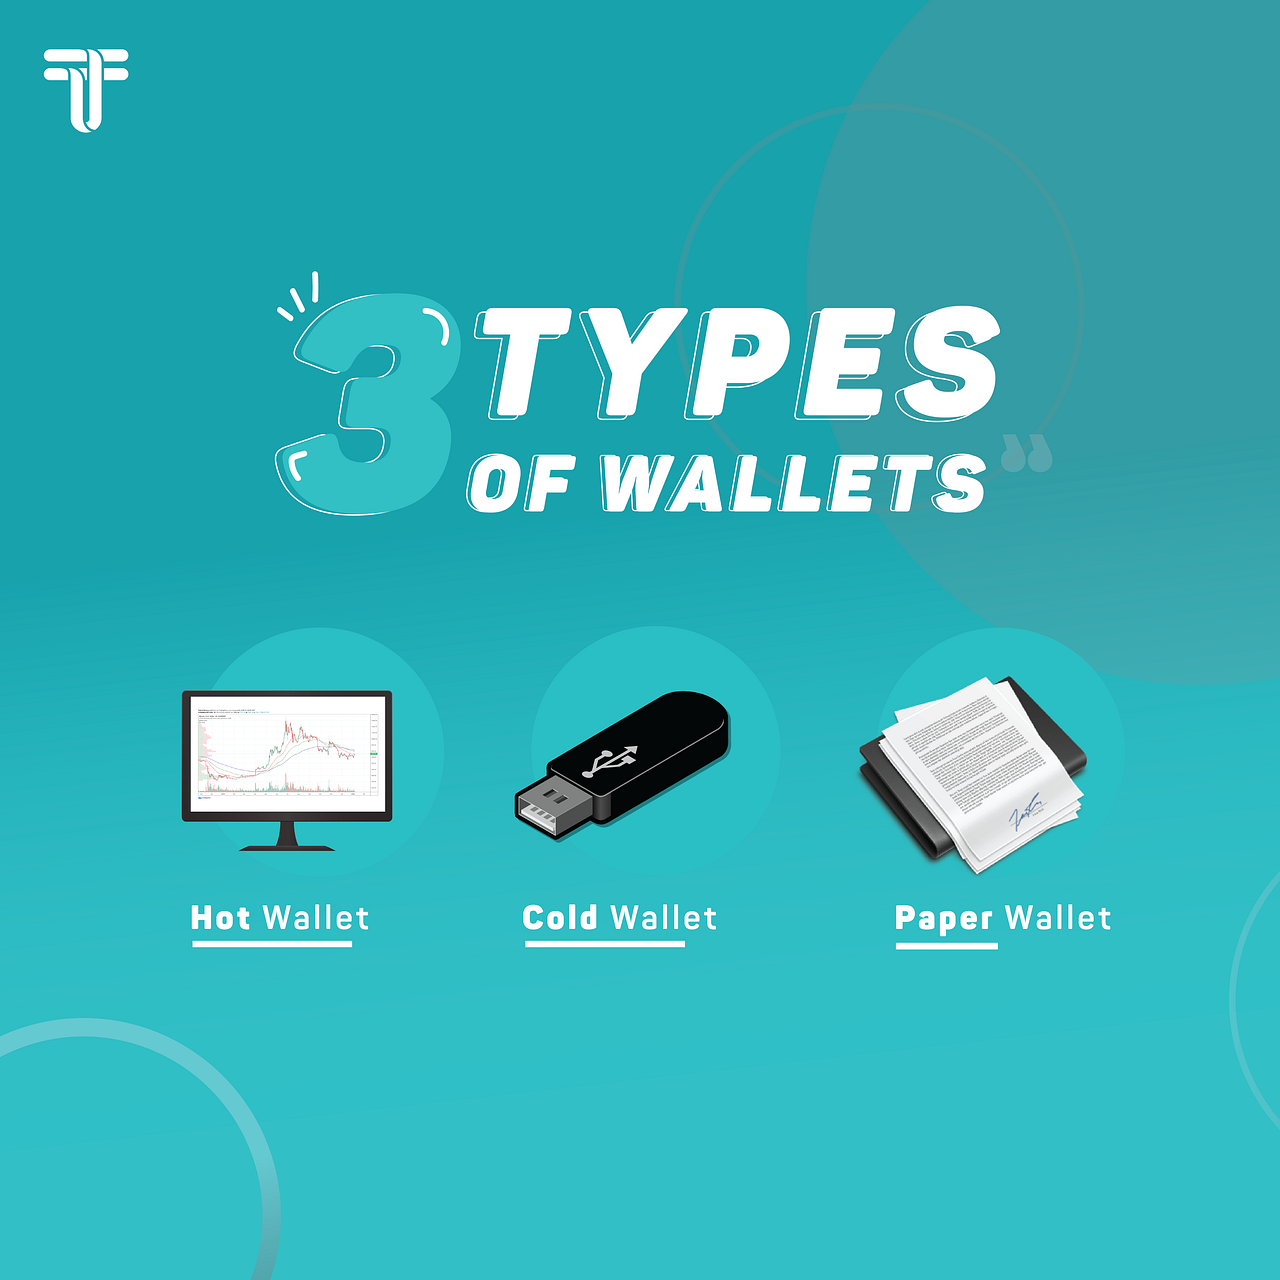 crypto wallet features